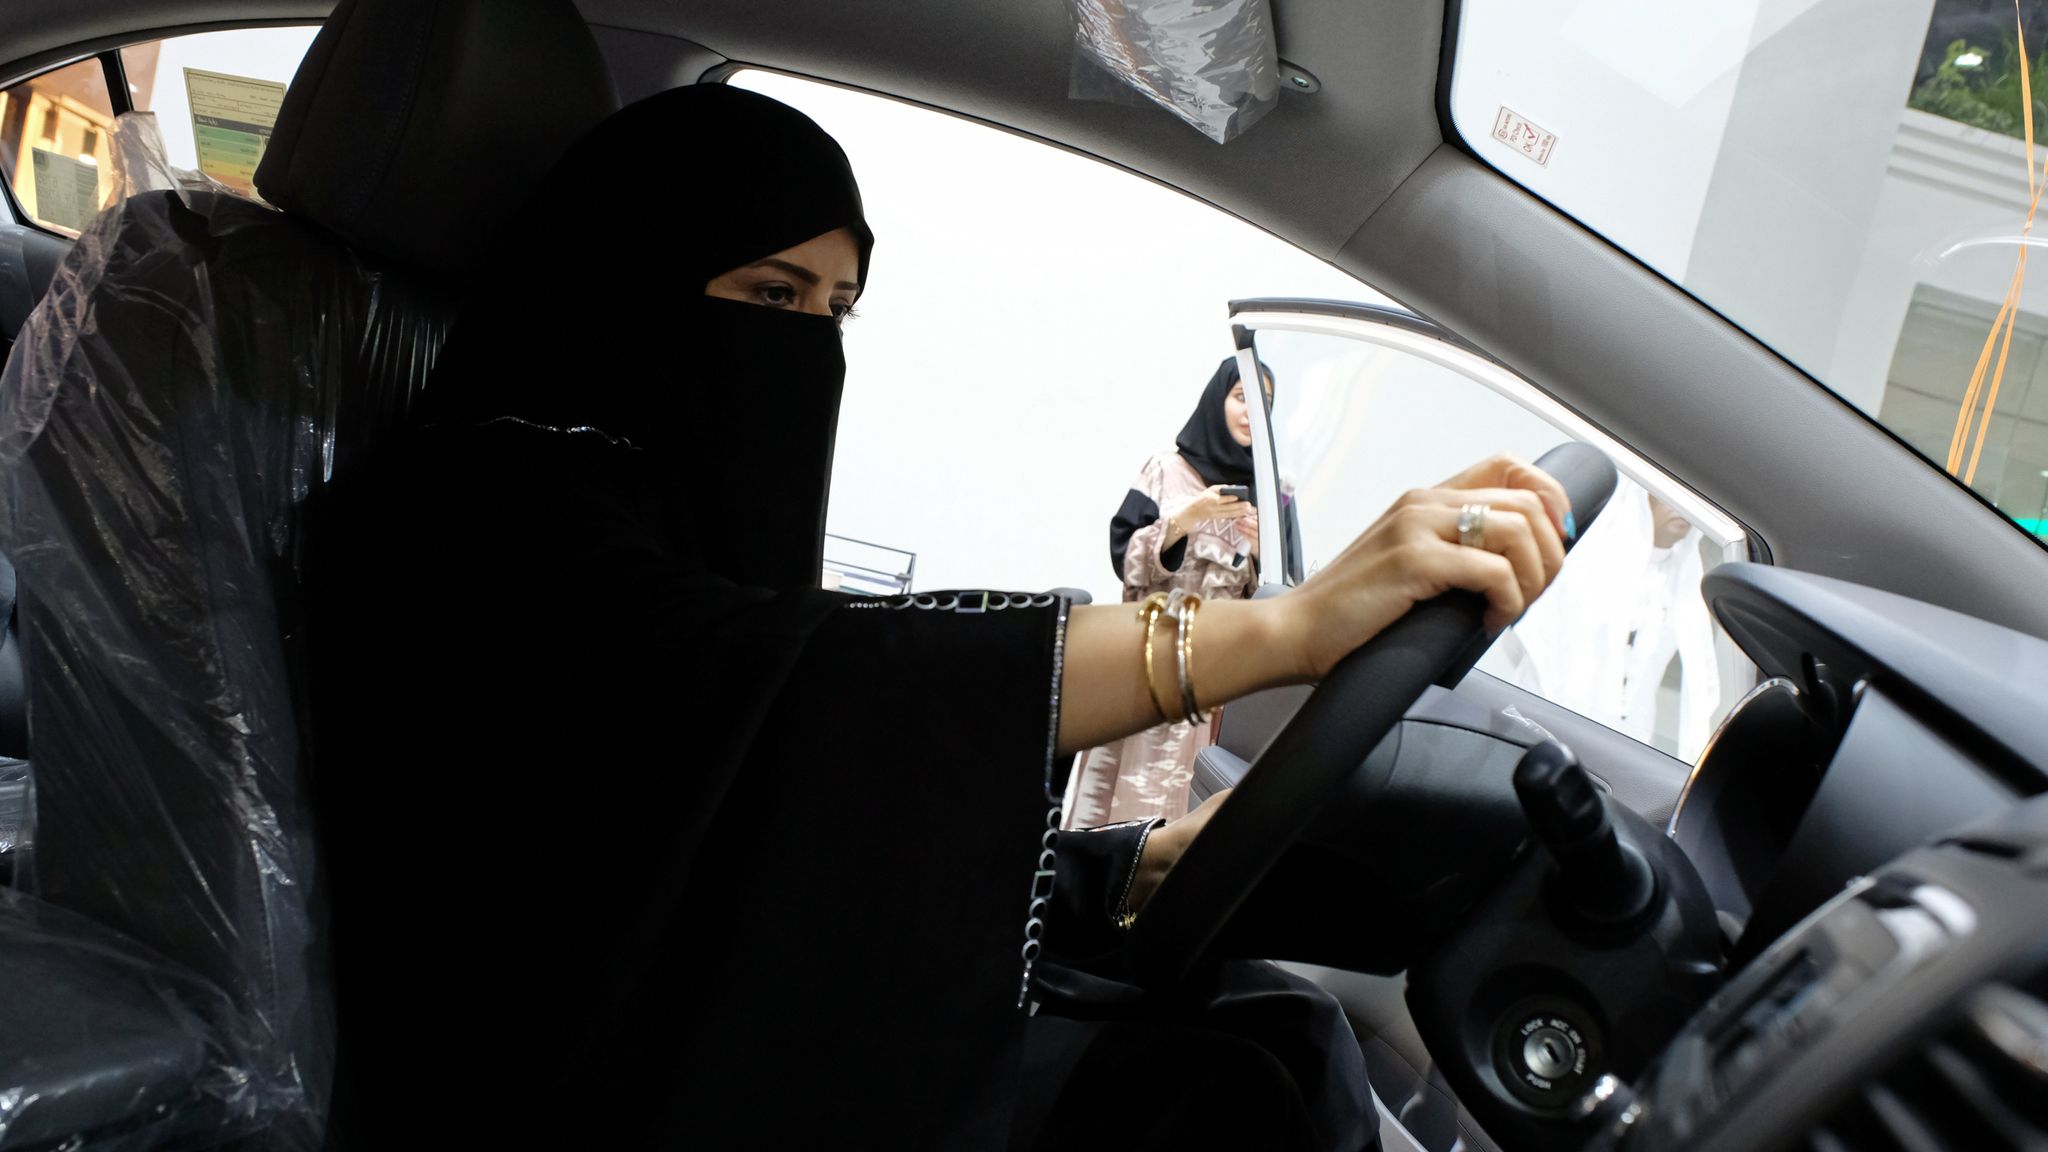 Saudi Arabia issues first driving licences to women | World News | Sky News